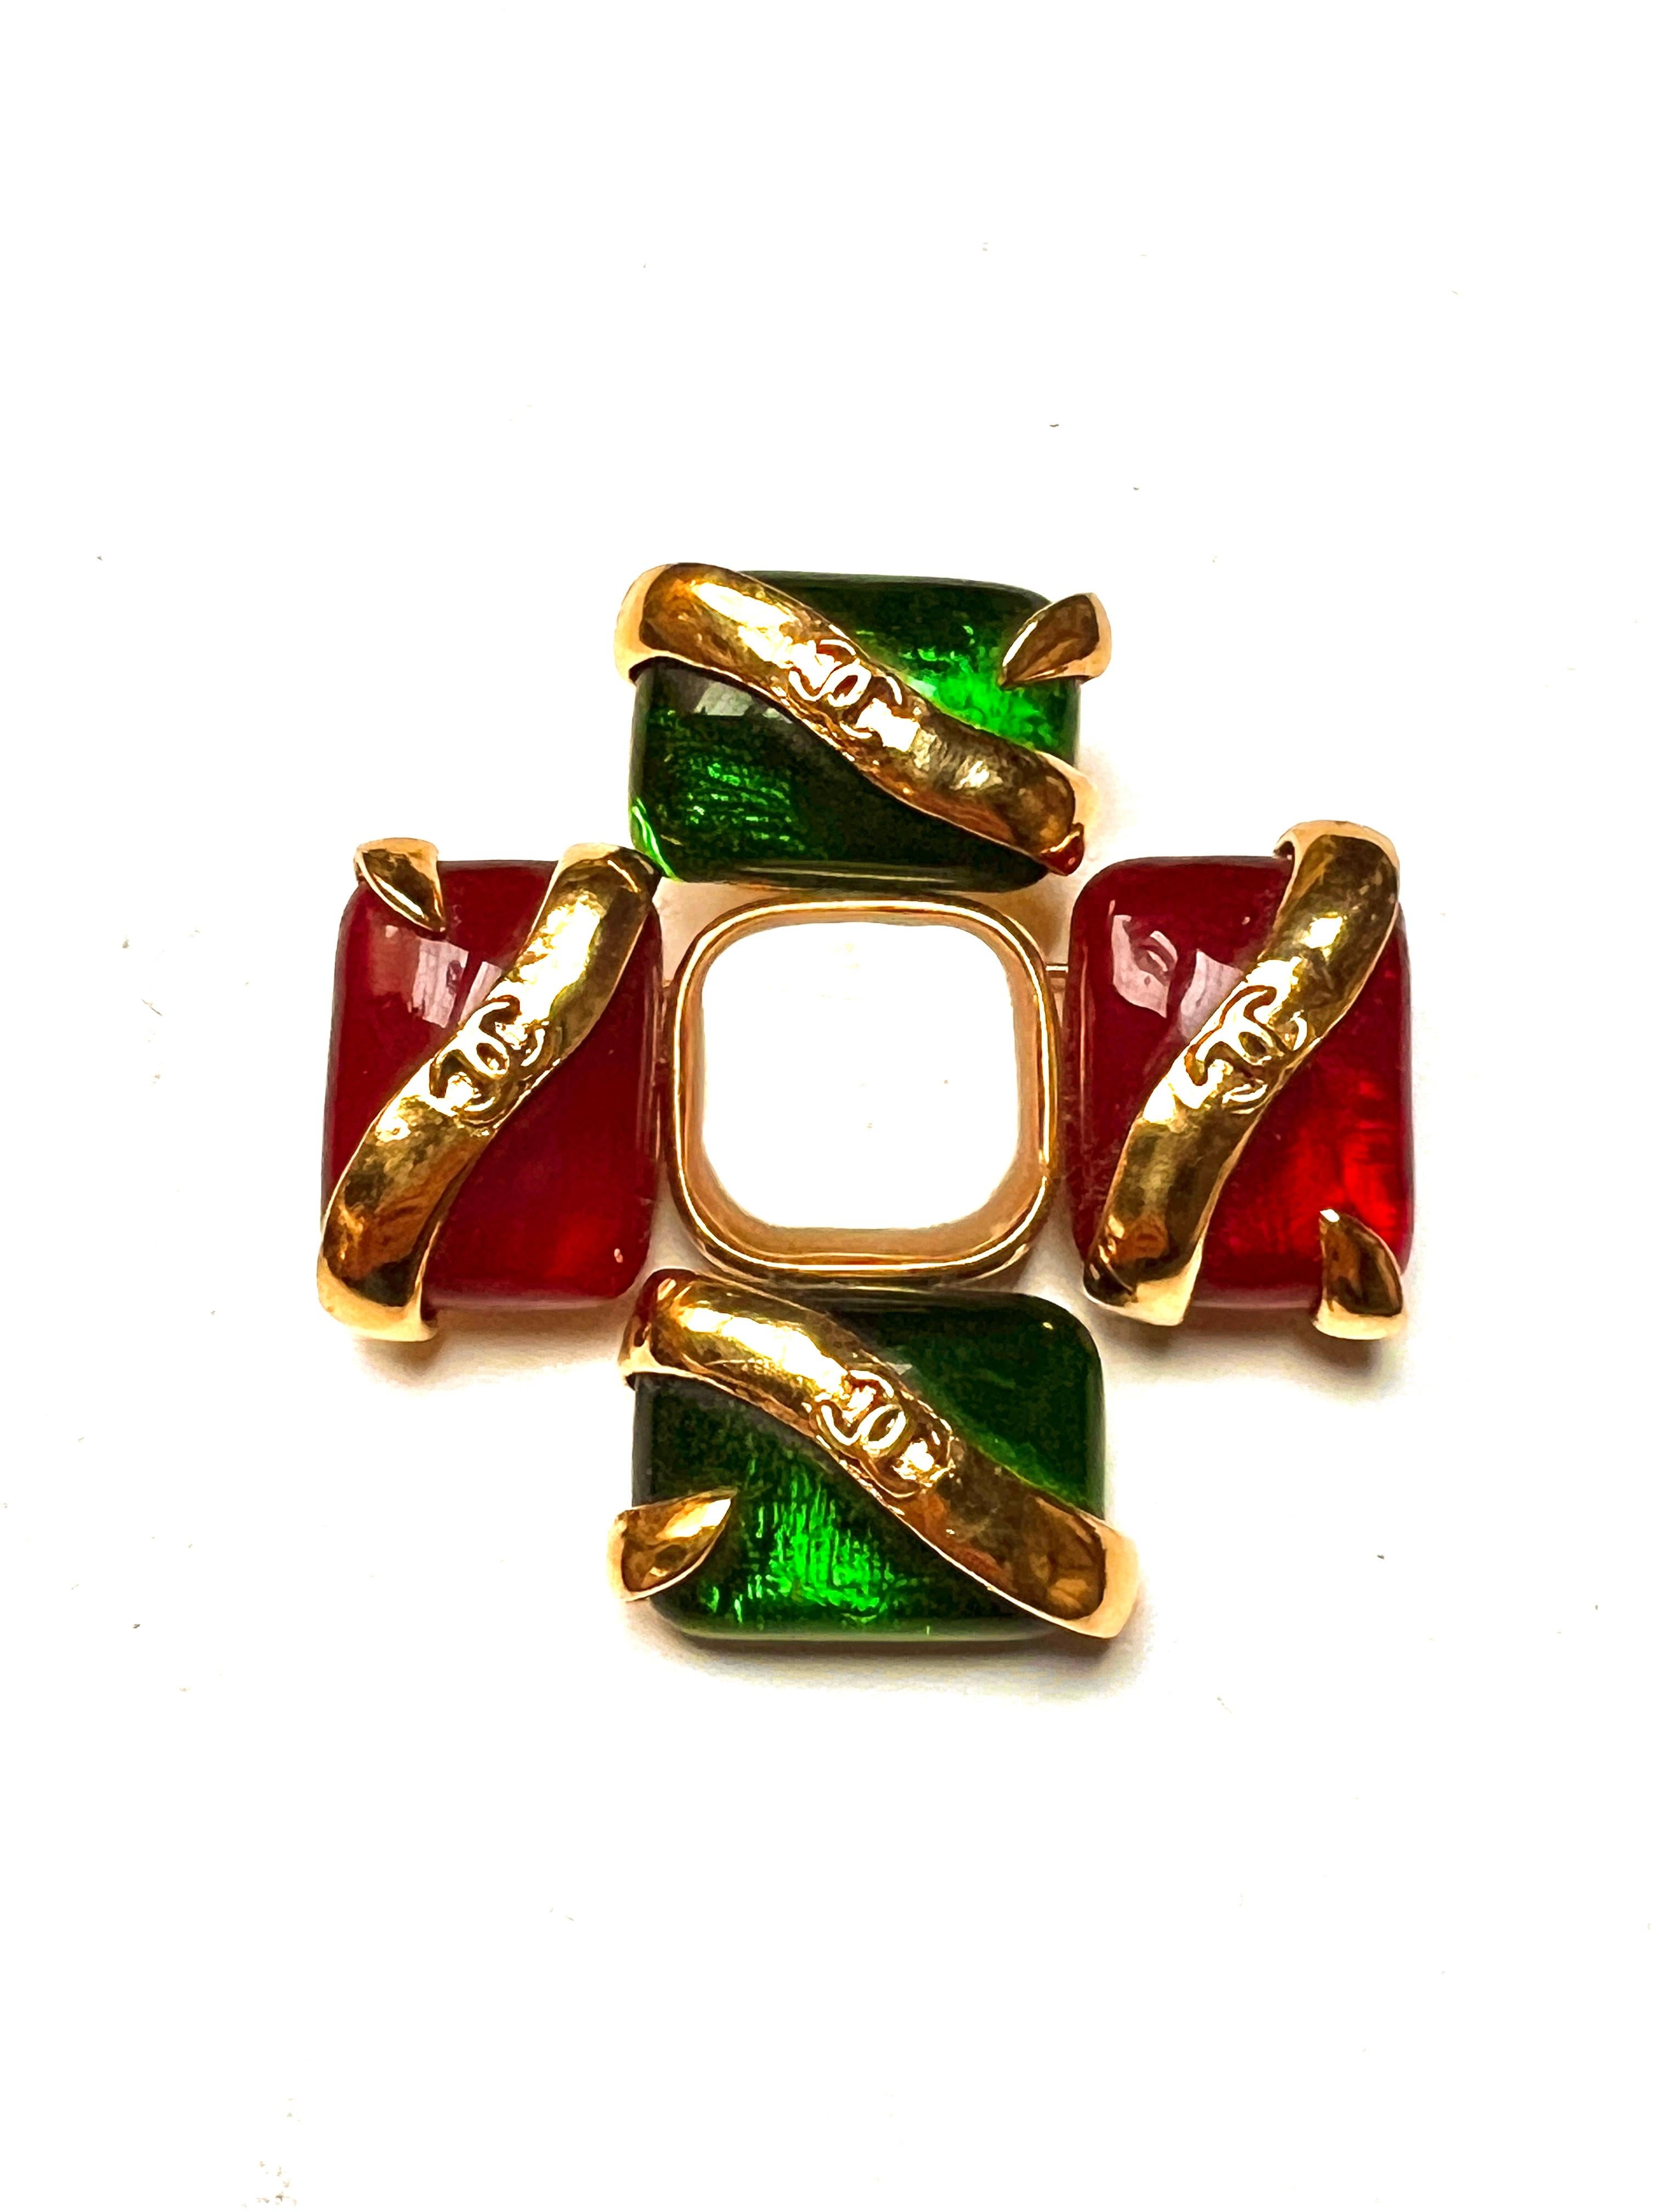 Gothic Revival Rare Chanel Brooch, 1994 Spring, Robert Goossens & Maison Gripoix, Lagerfeld For Sale